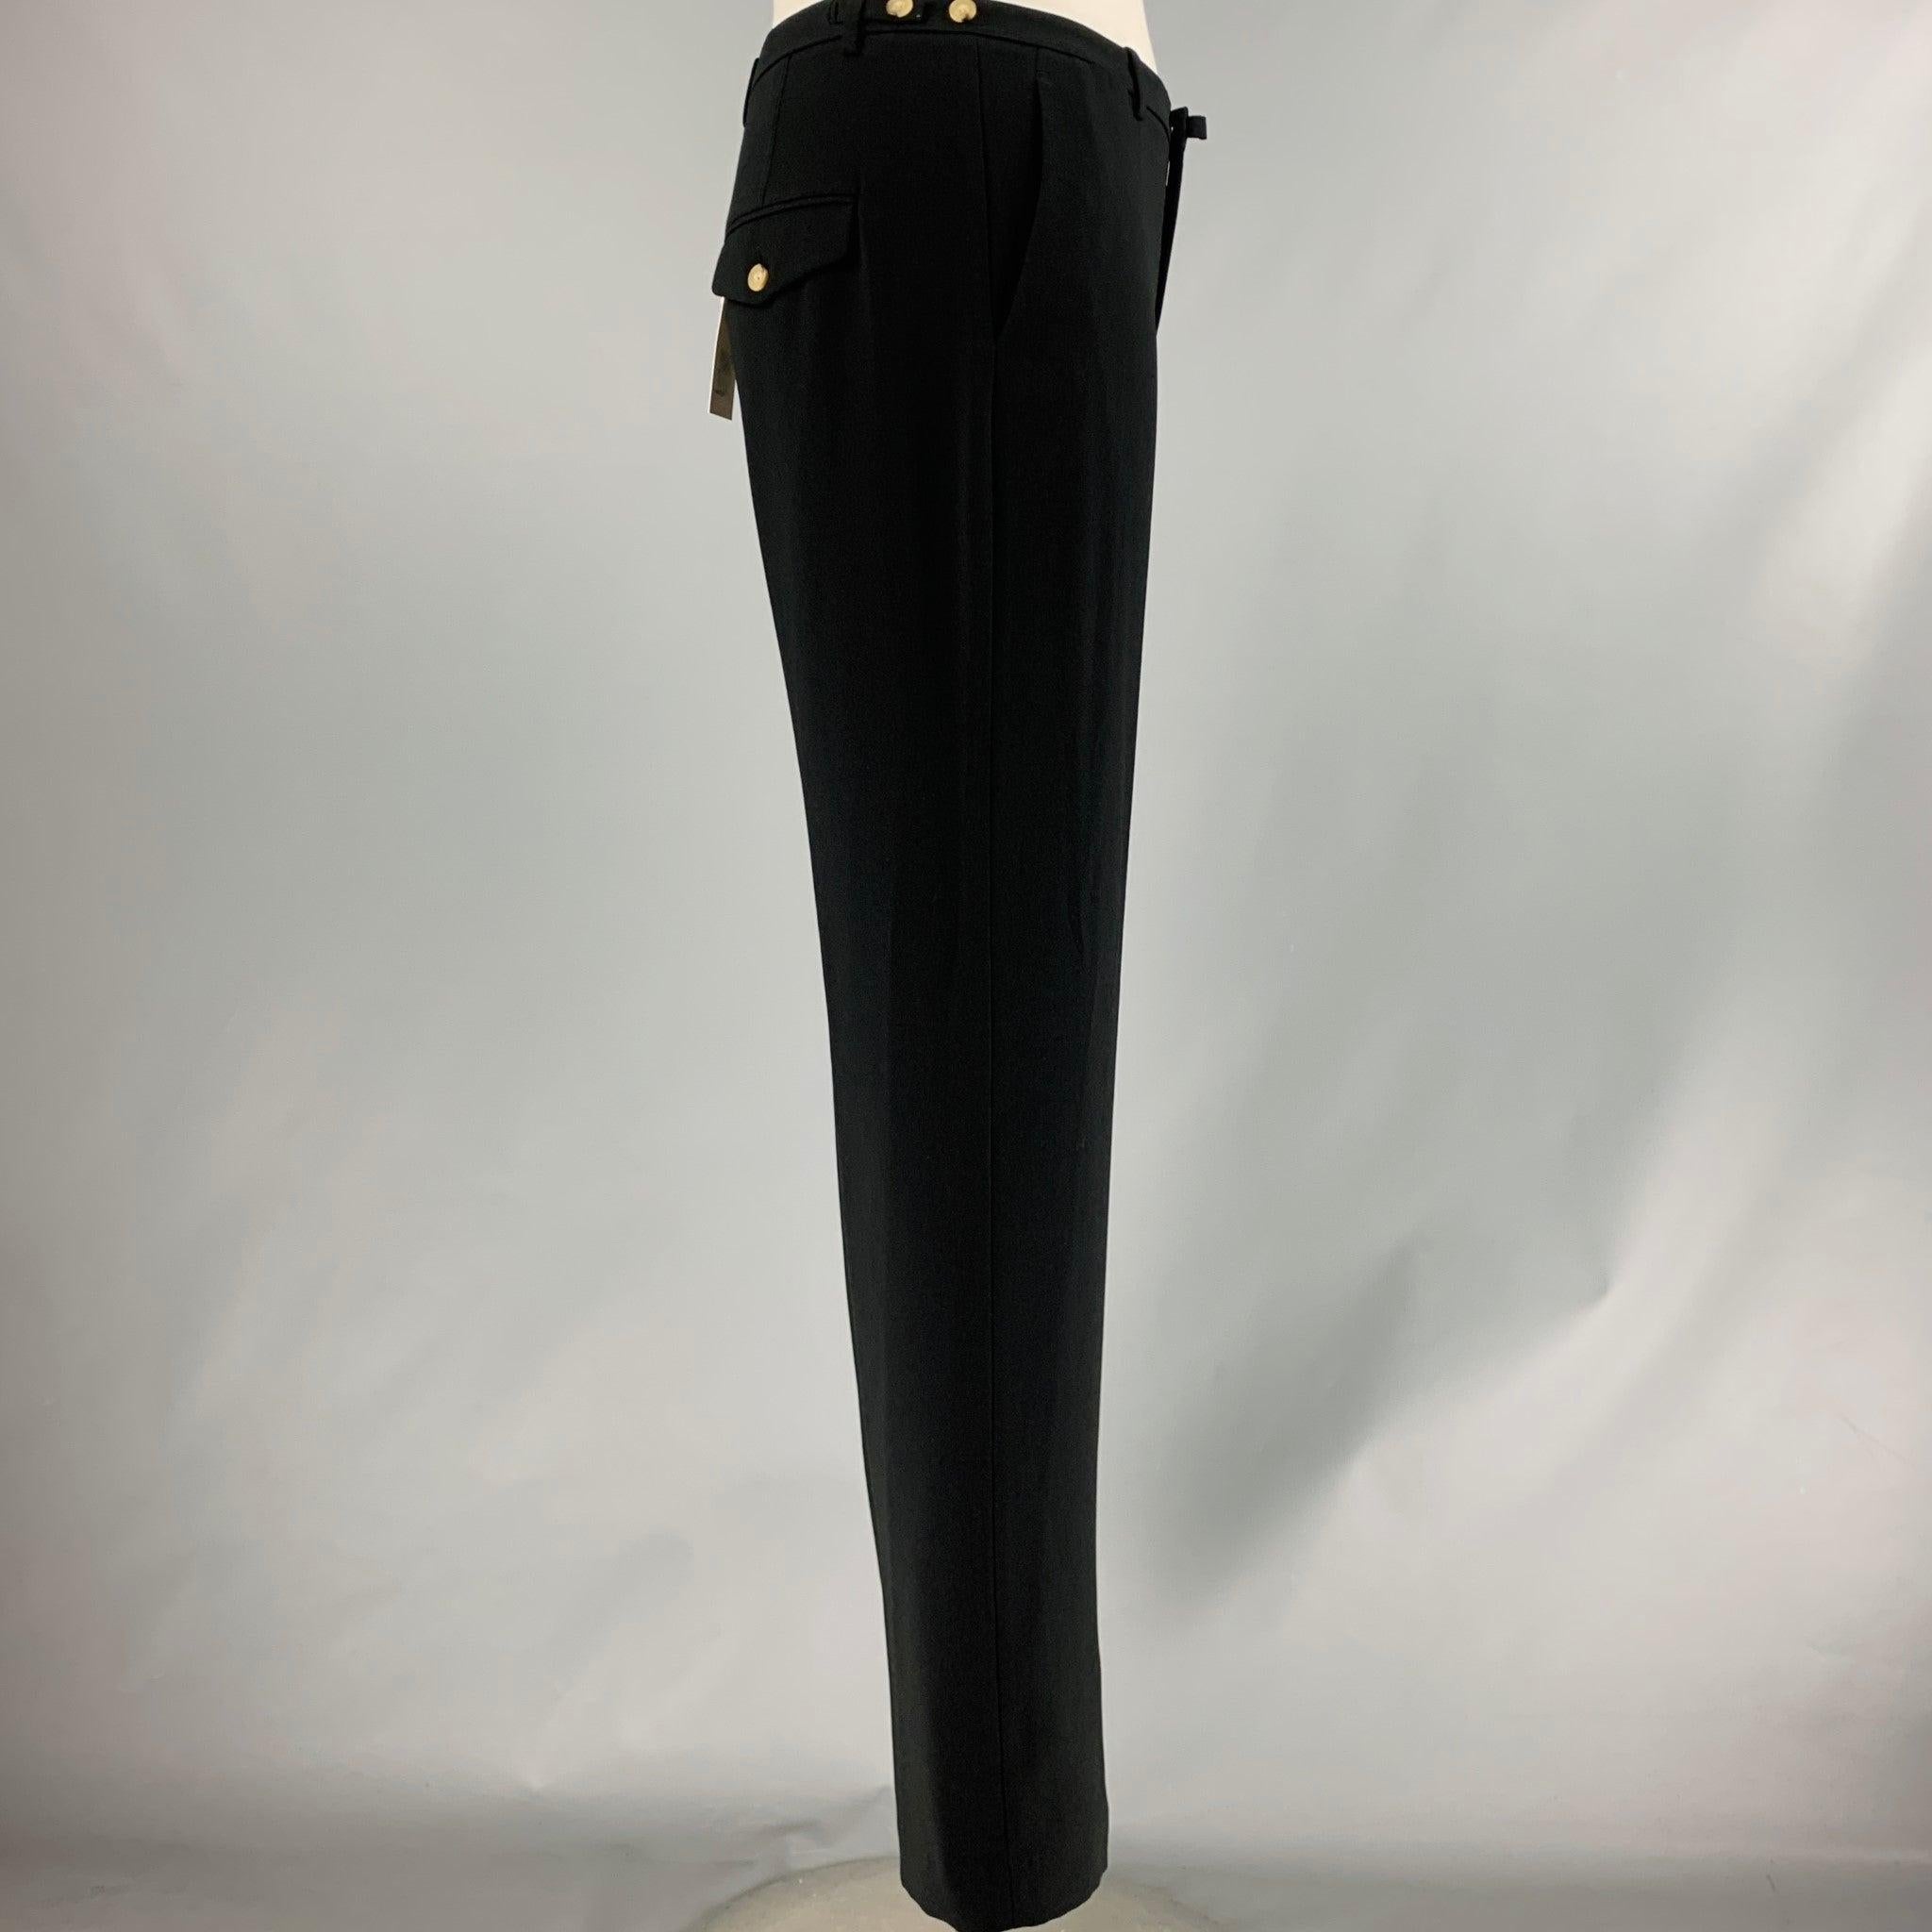 VINCE dress pants
in a black triacetate blend fabric featuring side tabs, and zip fly closure.New with Tags. 

Marked:   12 

Measurements: 
  Waist: 33 inches Rise: 11.5 inches Inseam: 32 inches 
  
  
 
Reference No.: 128357
Category: Dress